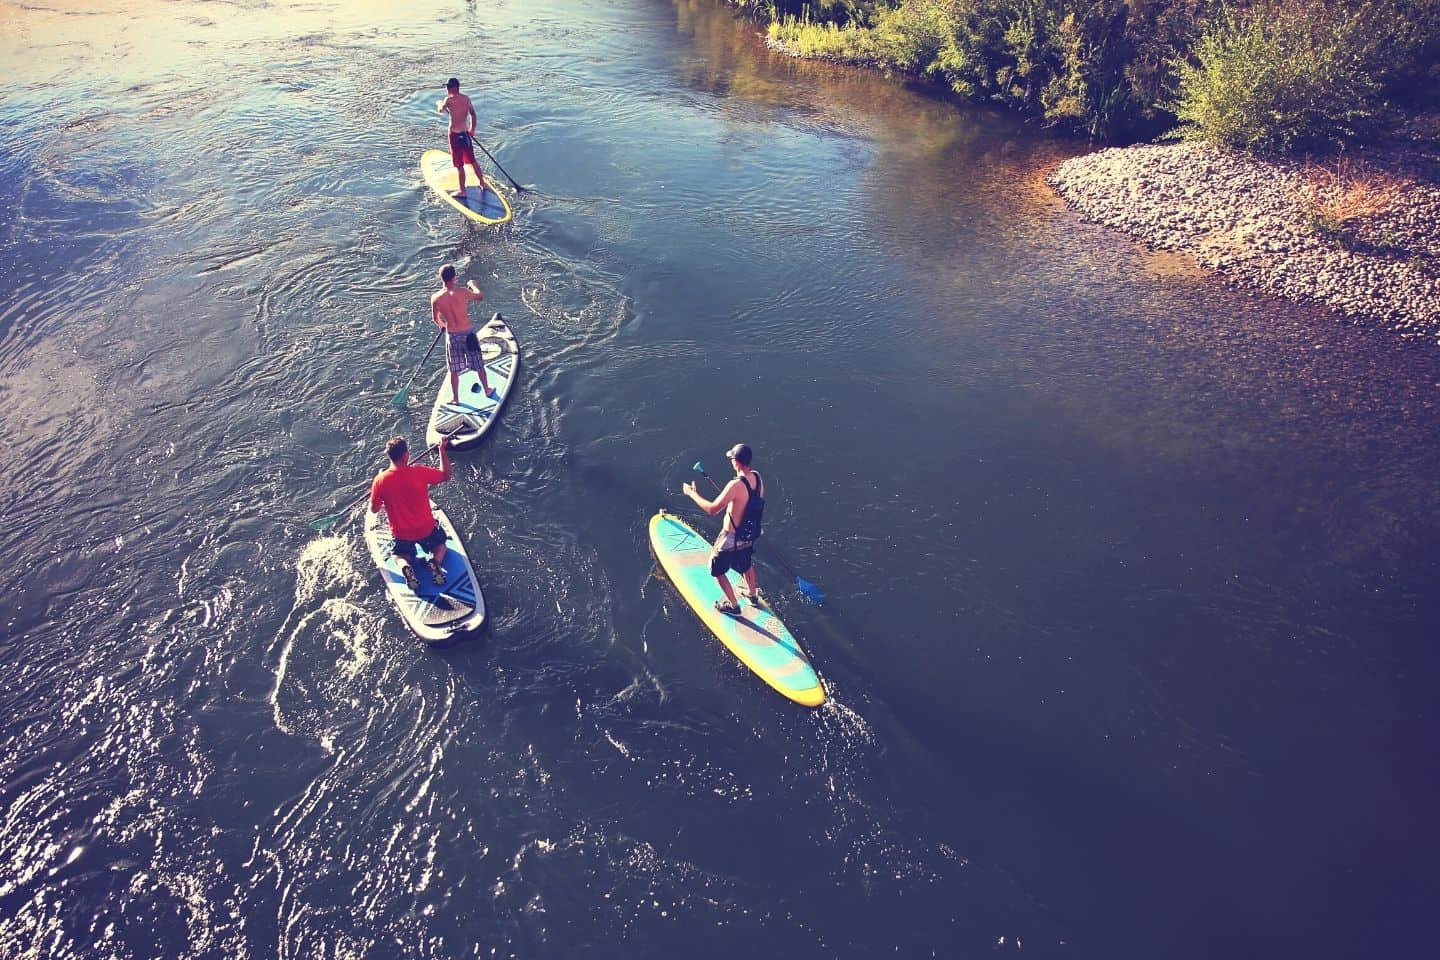 A group of man on paddle boarding adventure